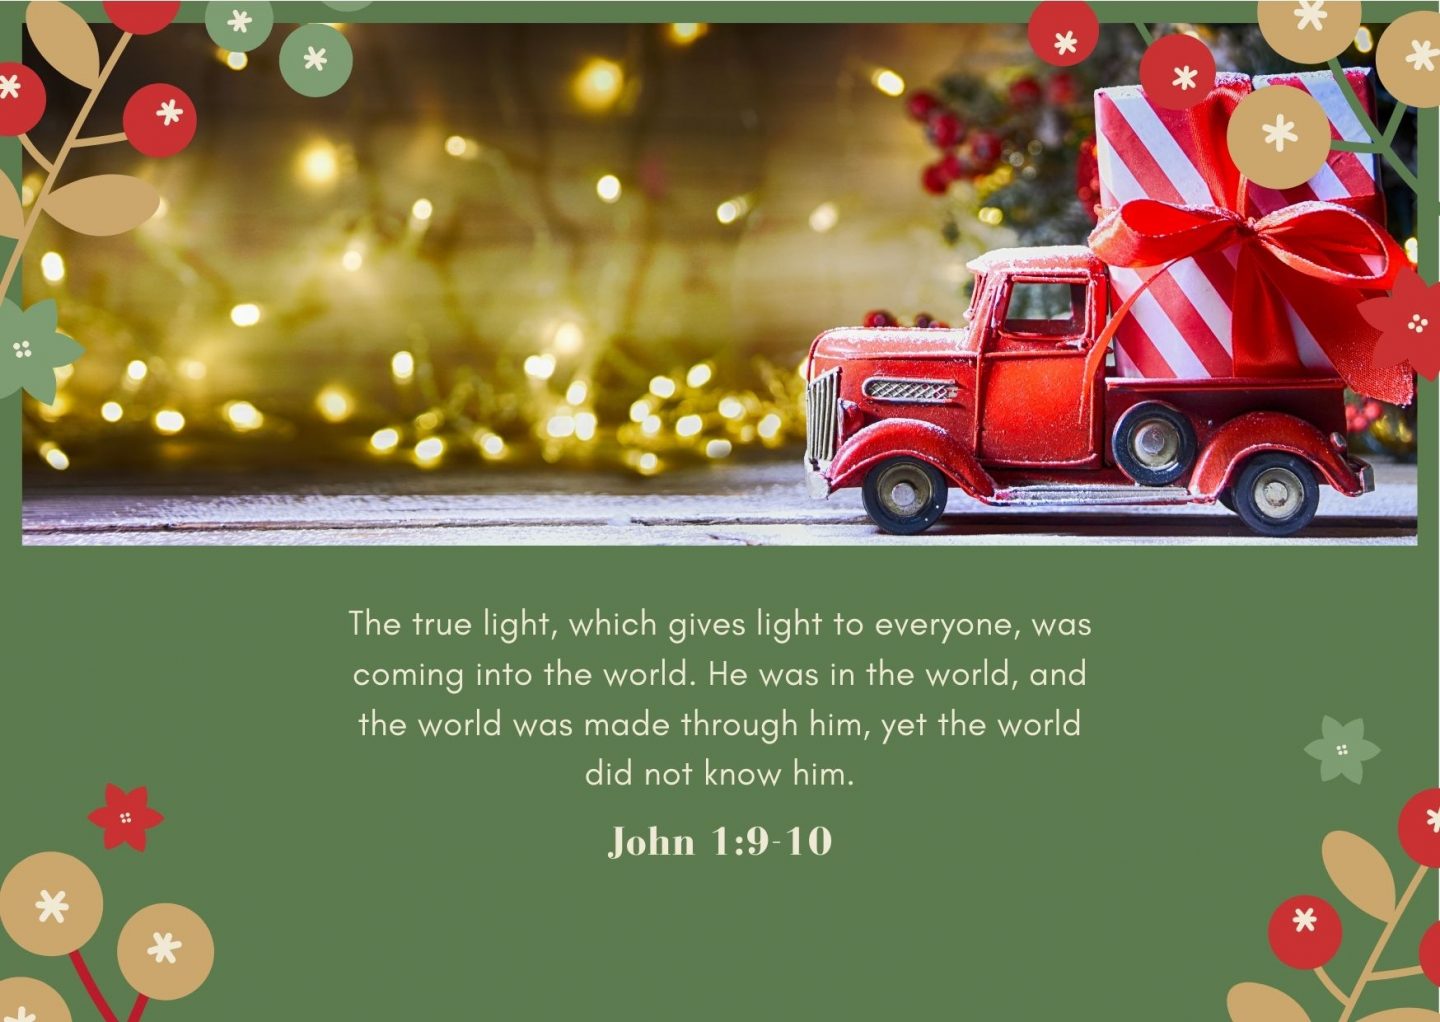 The true light, which gives light to everyone, was coming into the world. He was in the world, and the world was made through him, yet the world did not know him. John 1:9-10